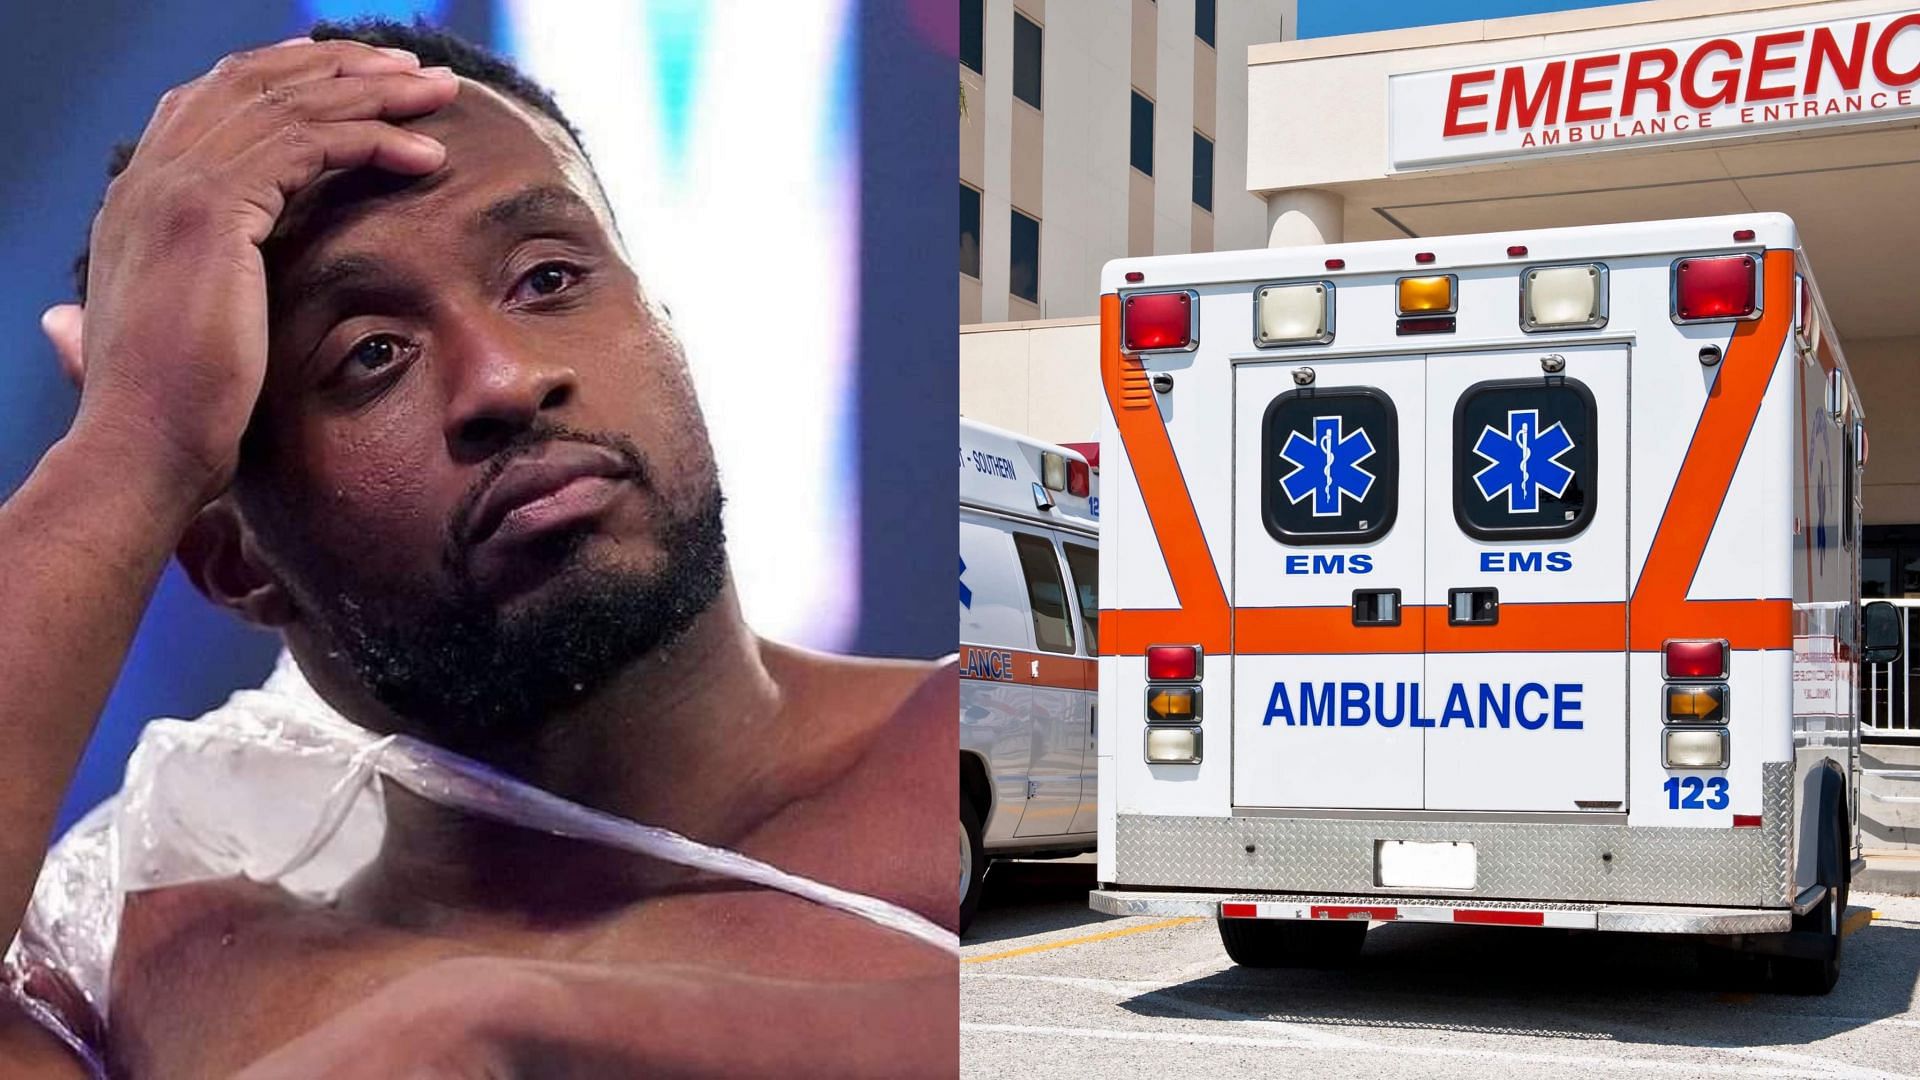 Big E has been out of action since March after suffering from a broken neck